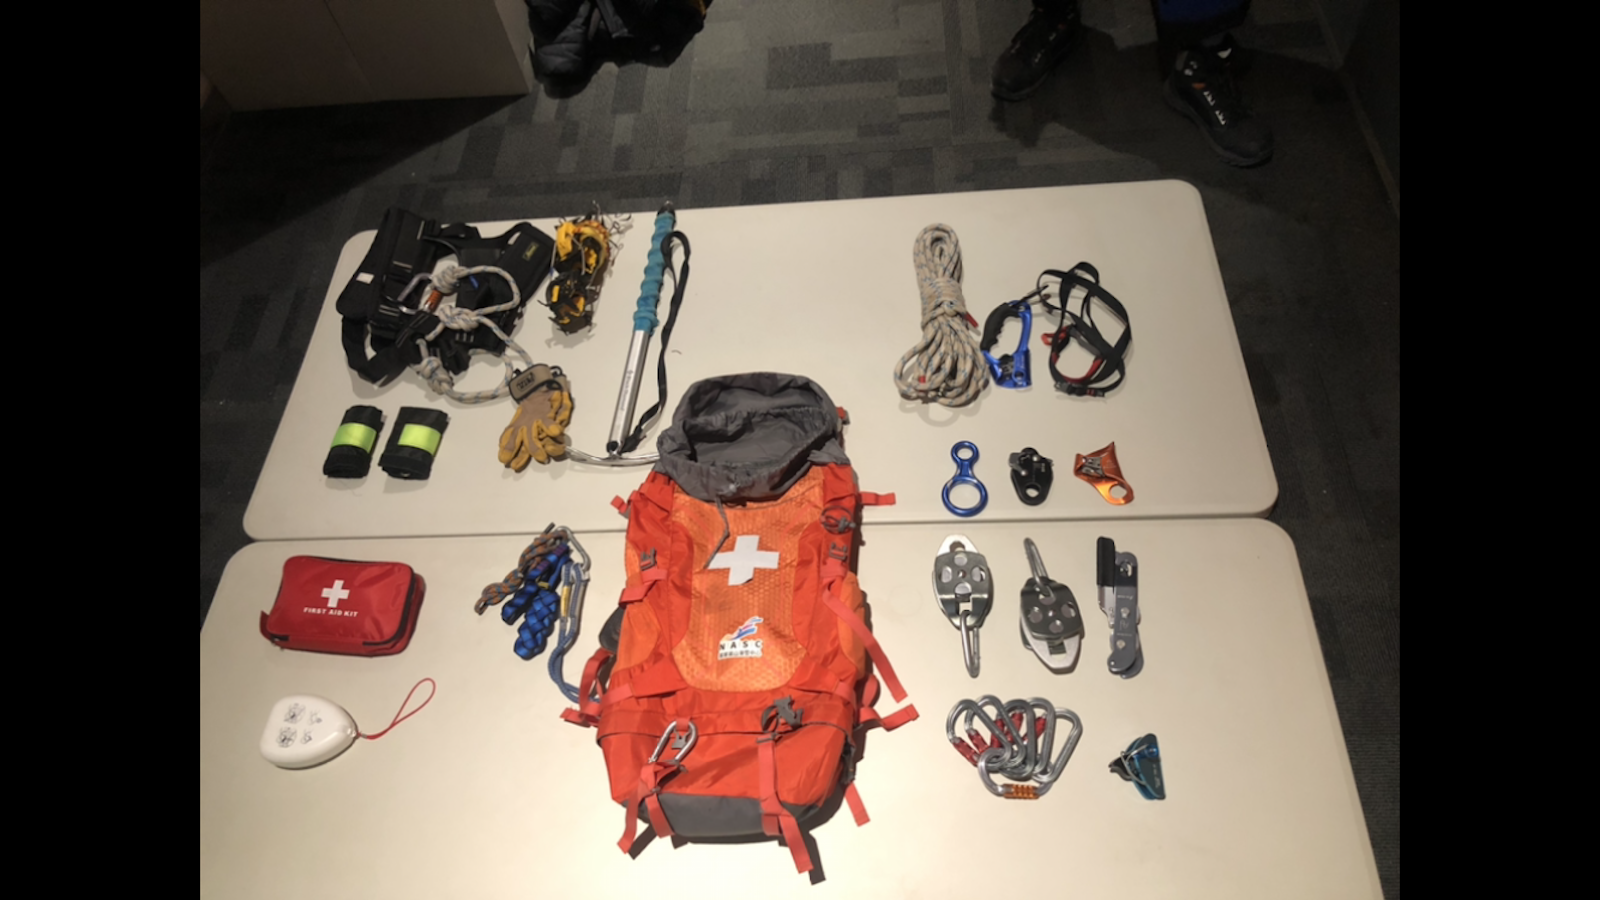 A look at some of the gear carried by ski patrollers while practicing for the 2022 Olympic ski events